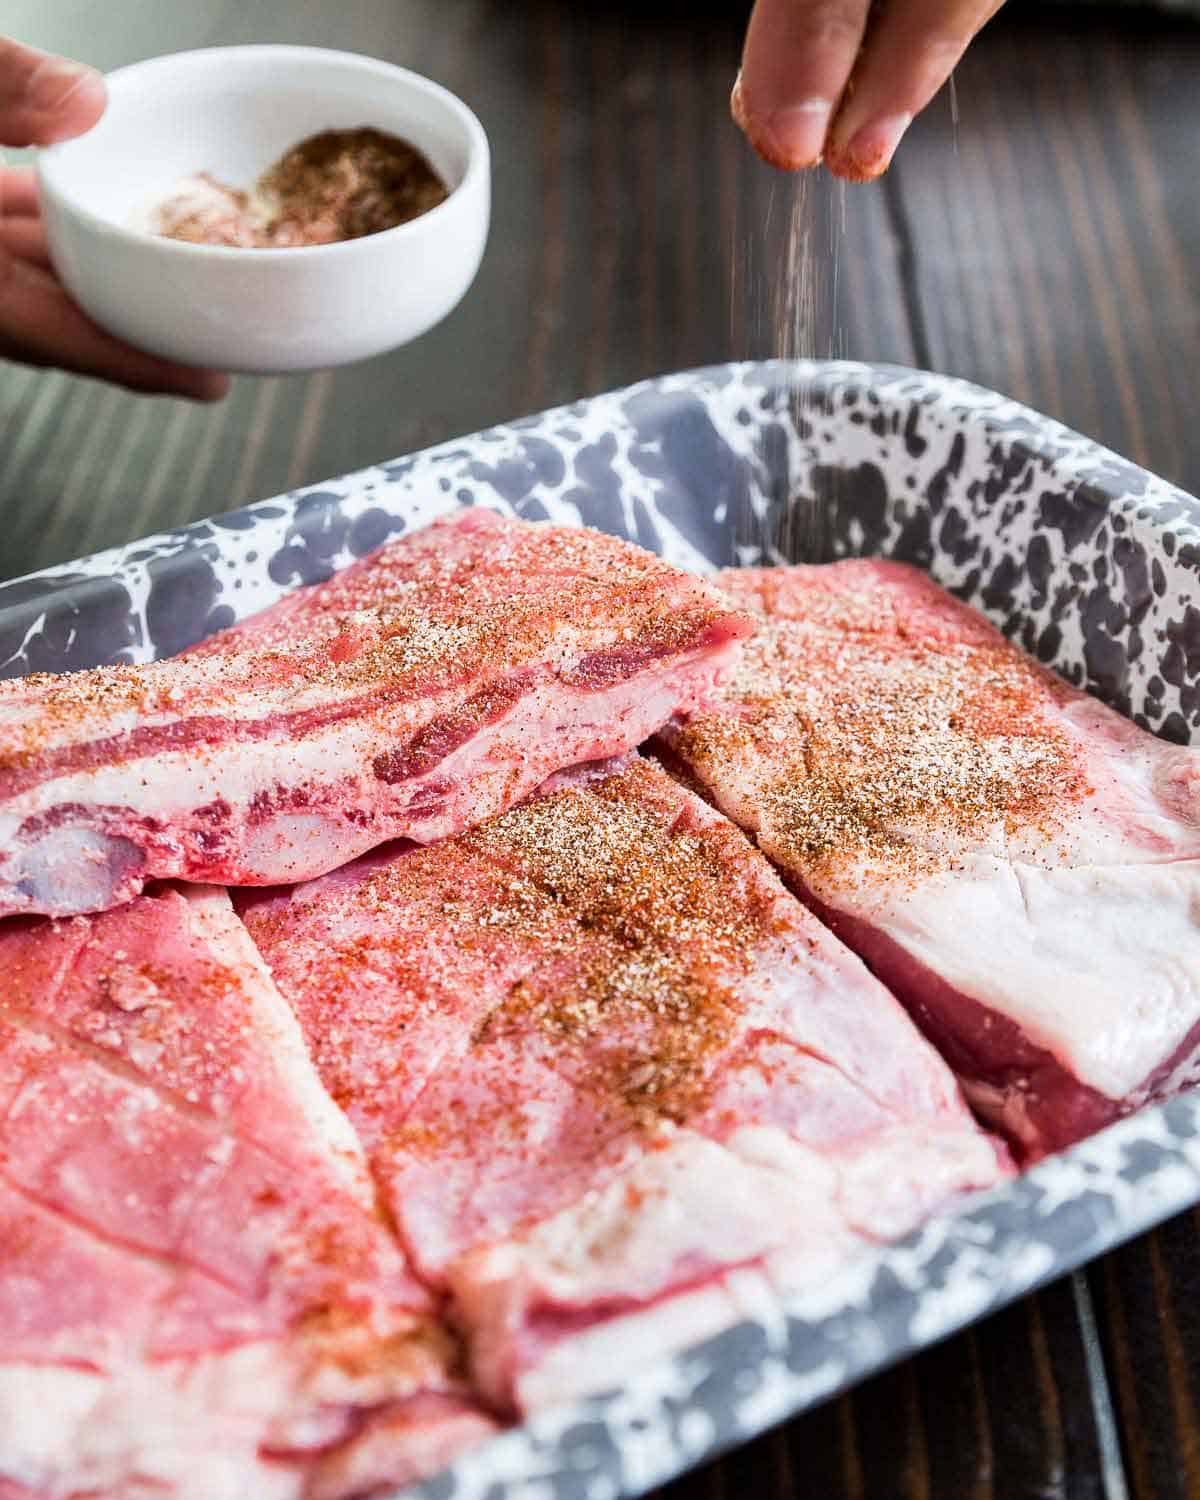 An easy lamb ribs recipe with BBQ dry rub and sauce.